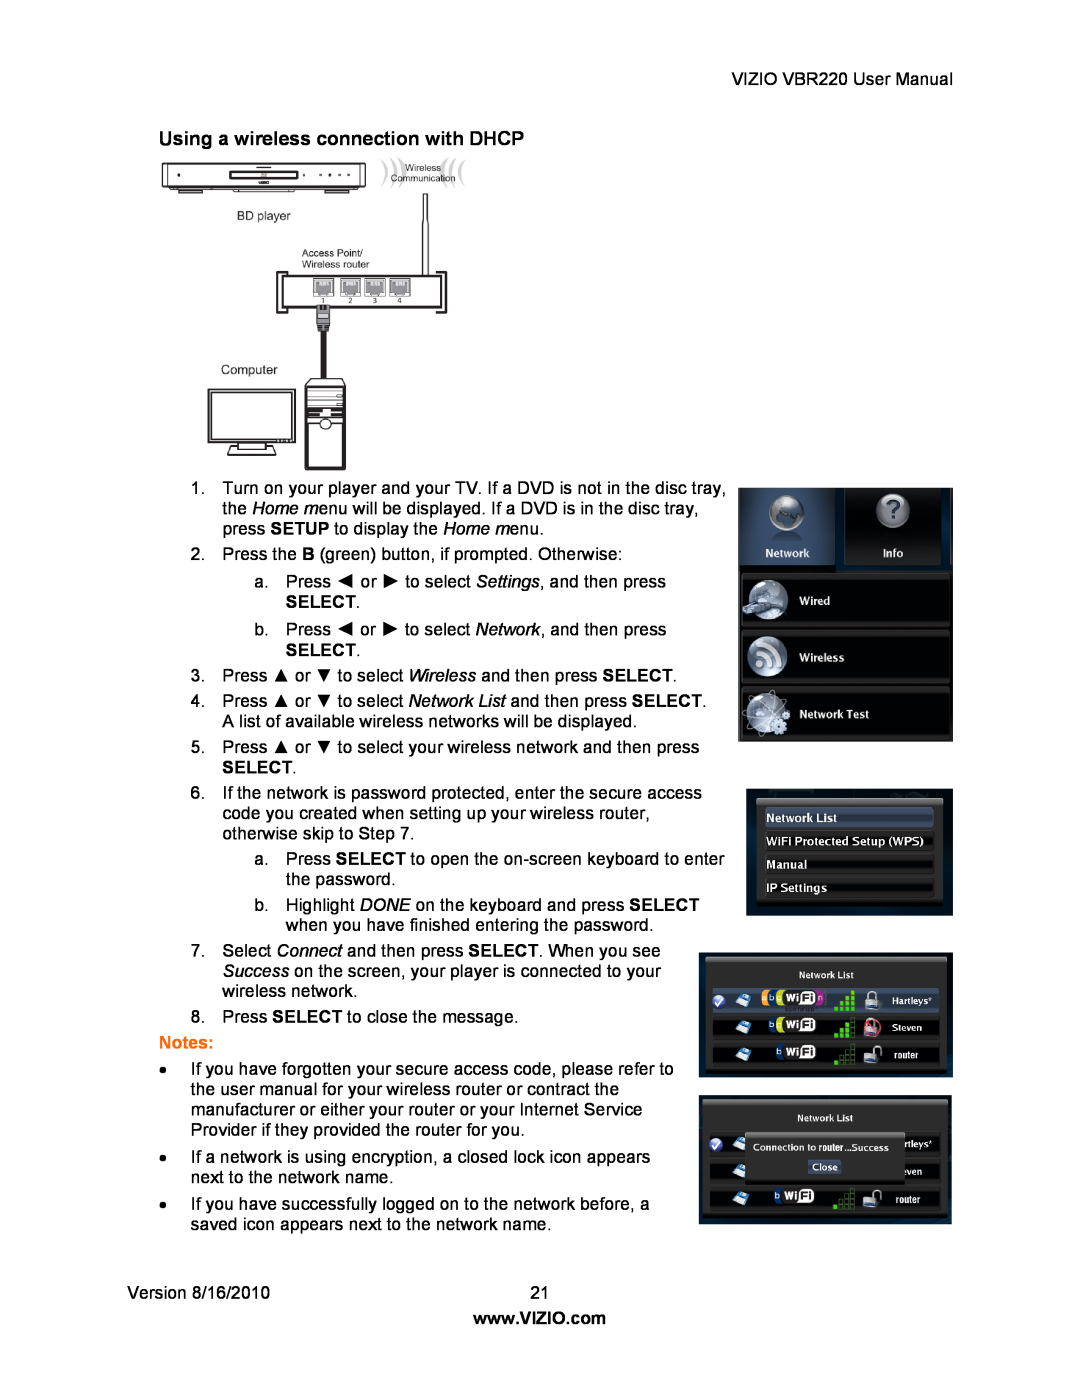 Panasonic VBR220 user manual Using a wireless connection with DHCP, Select 